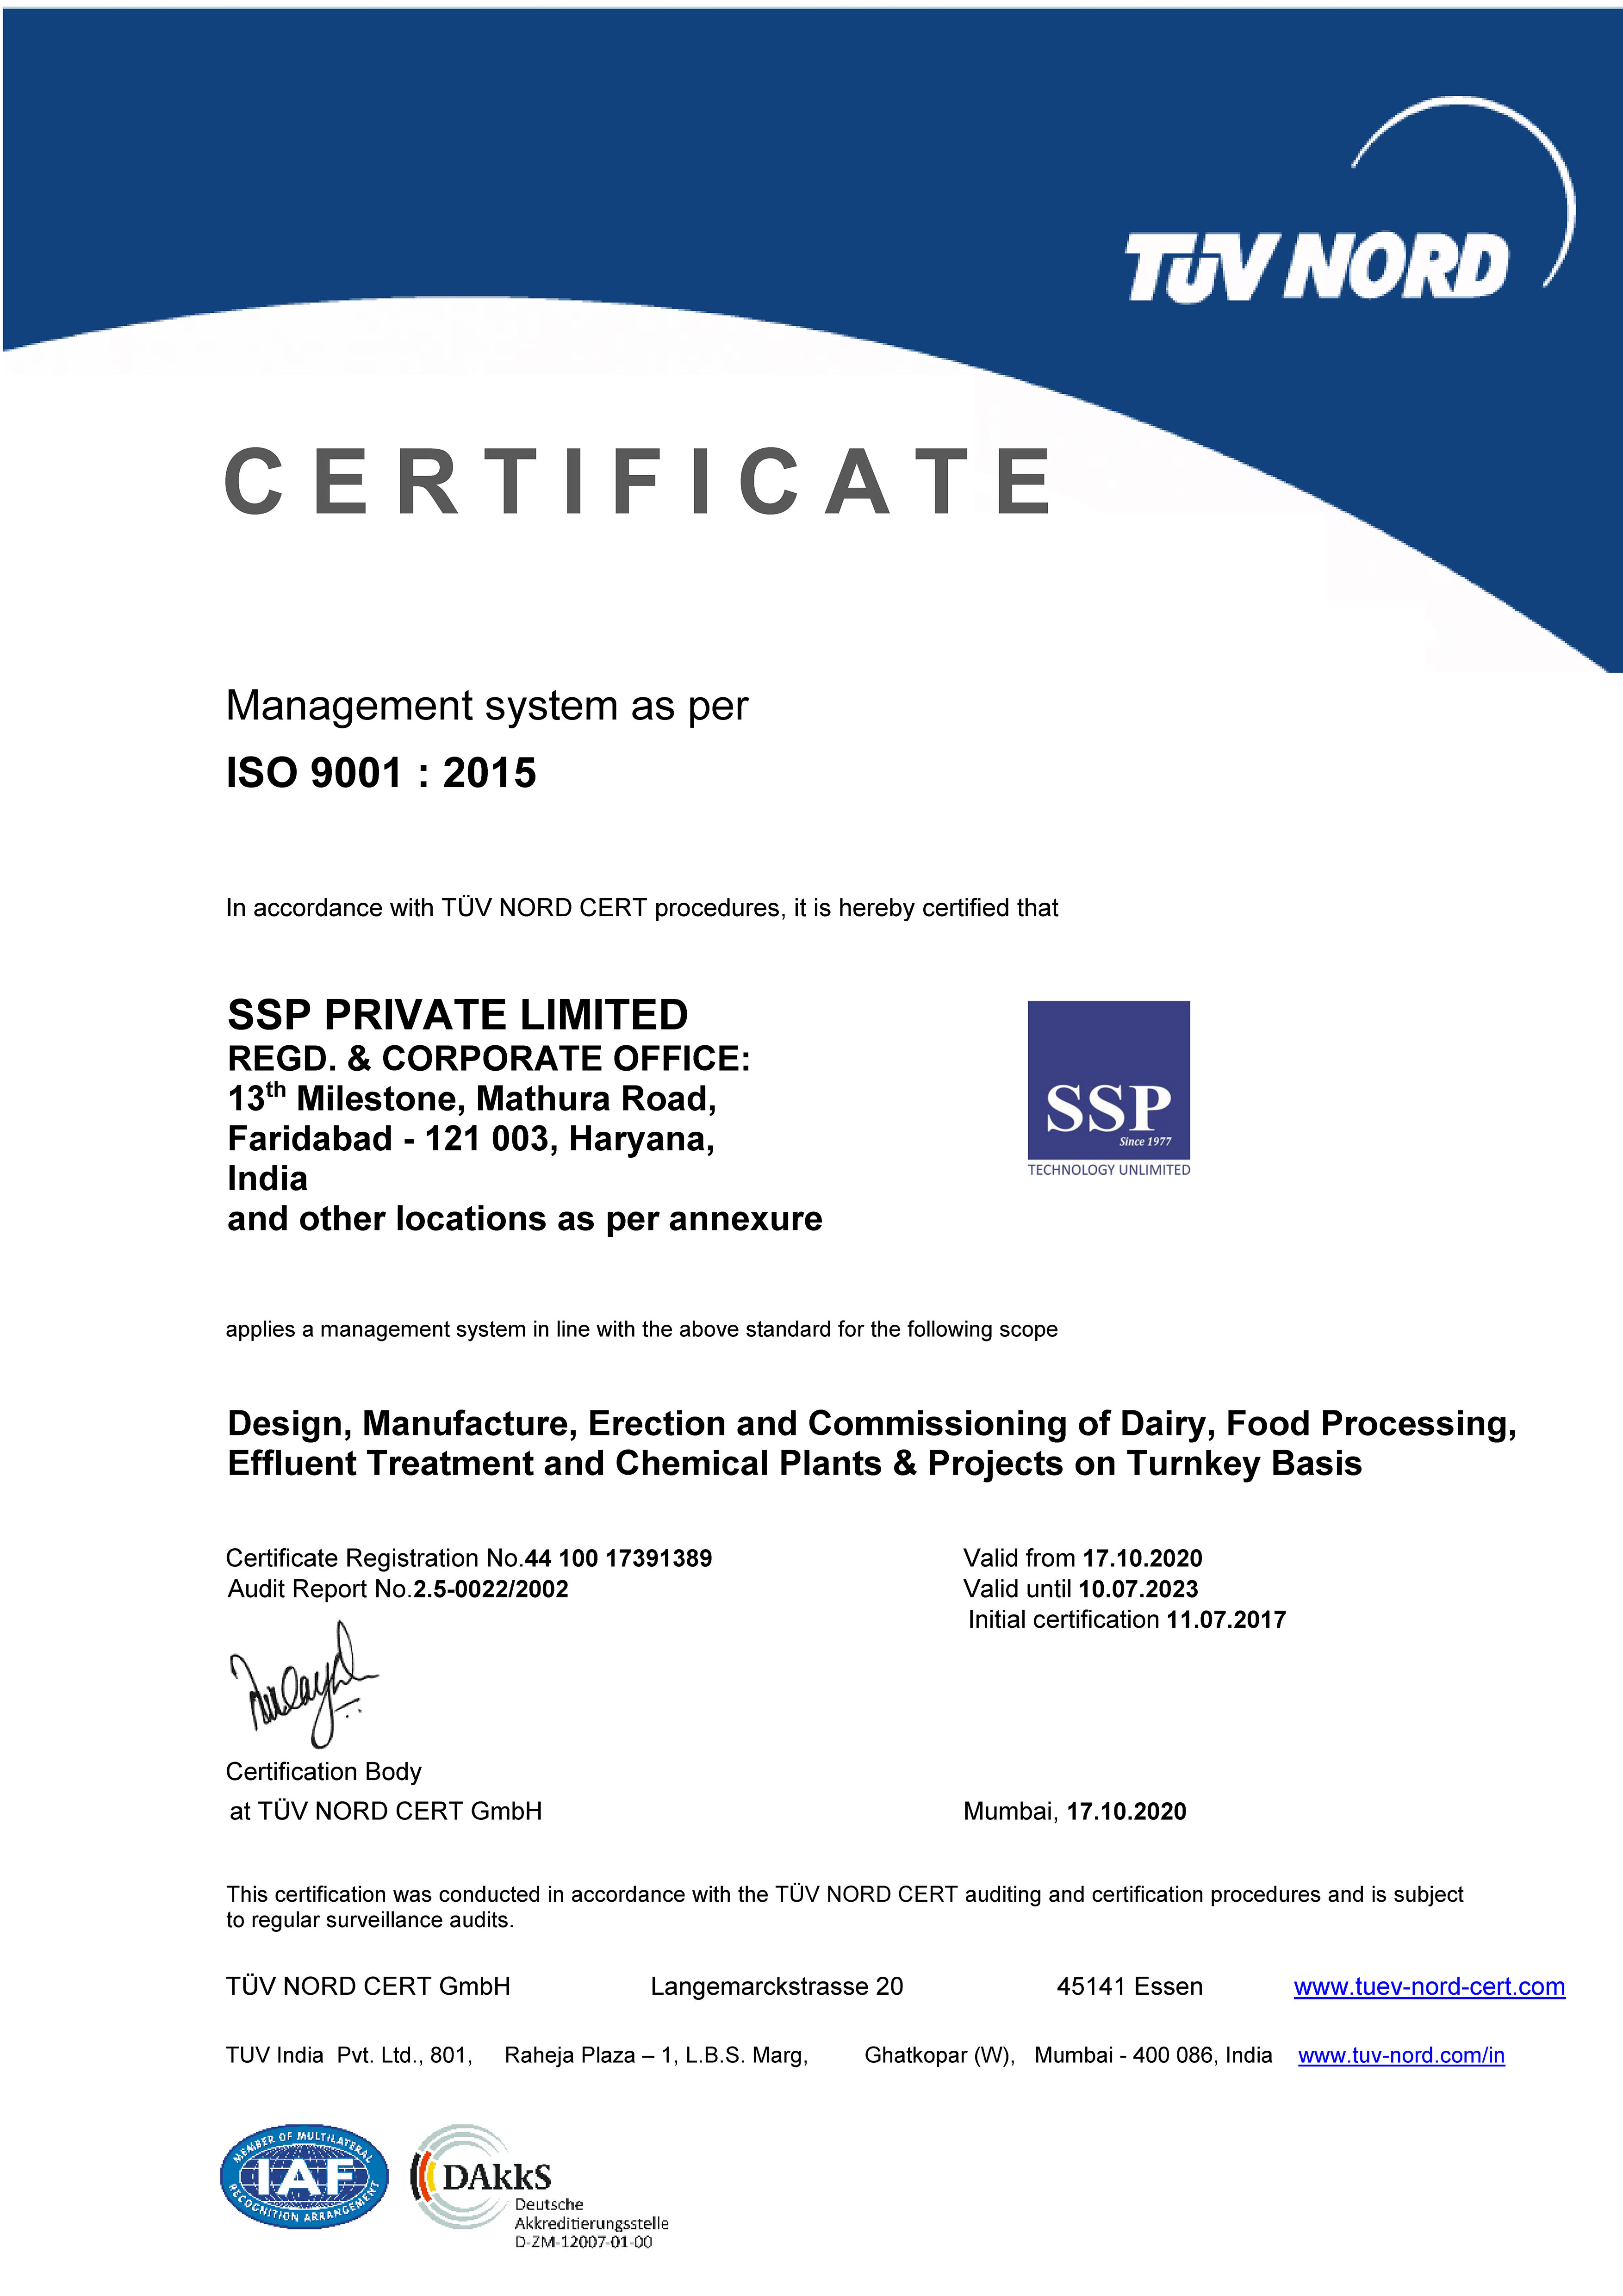 SSP is an ISO 9001:2015 Certified Company